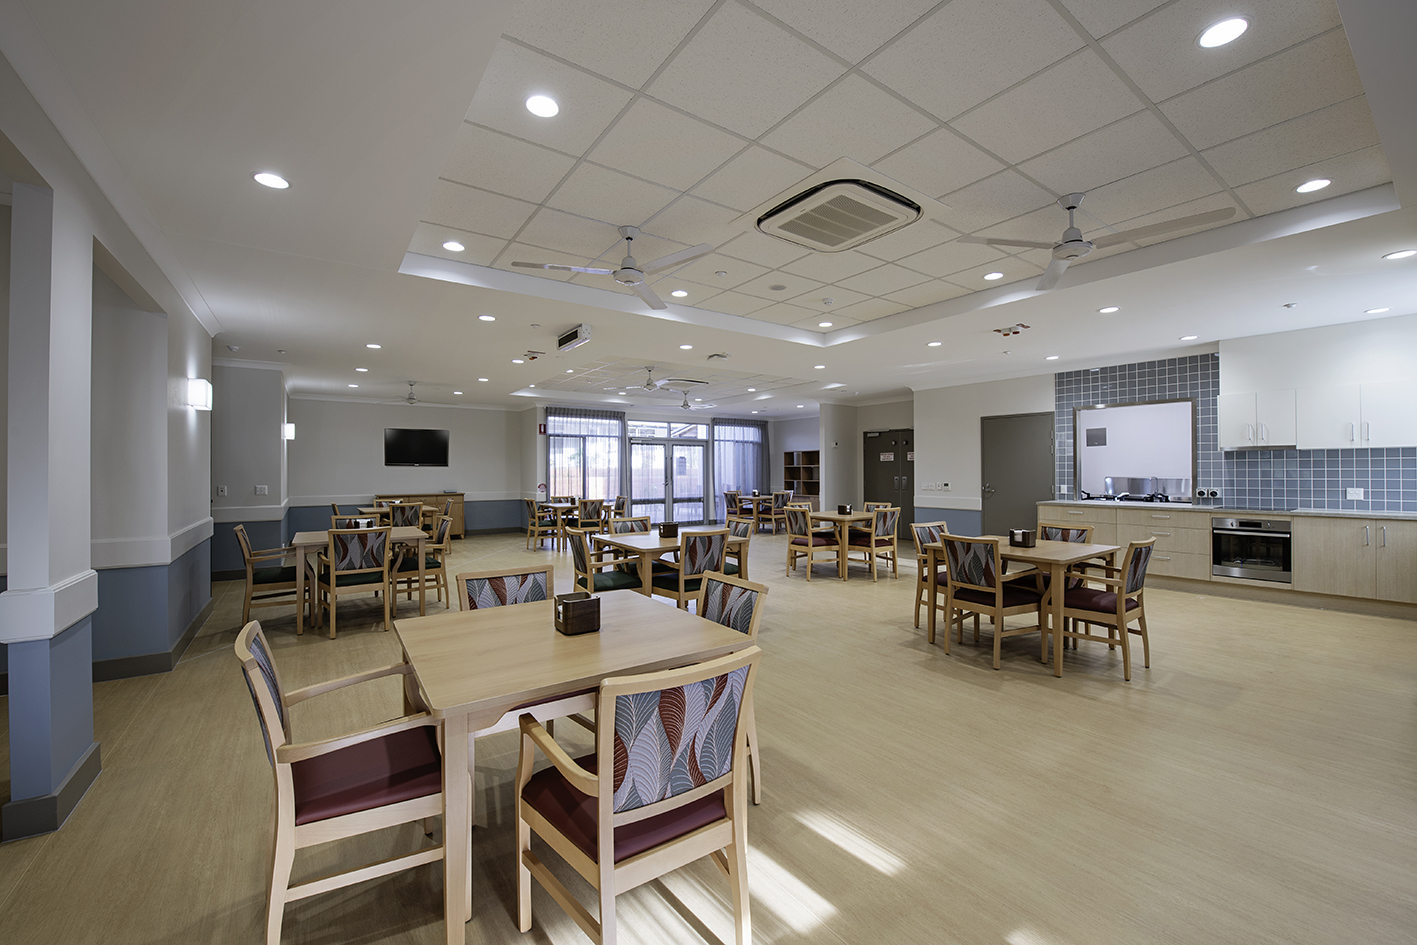 Residential Aged Care Facility Interiors by Hodgkison Architects